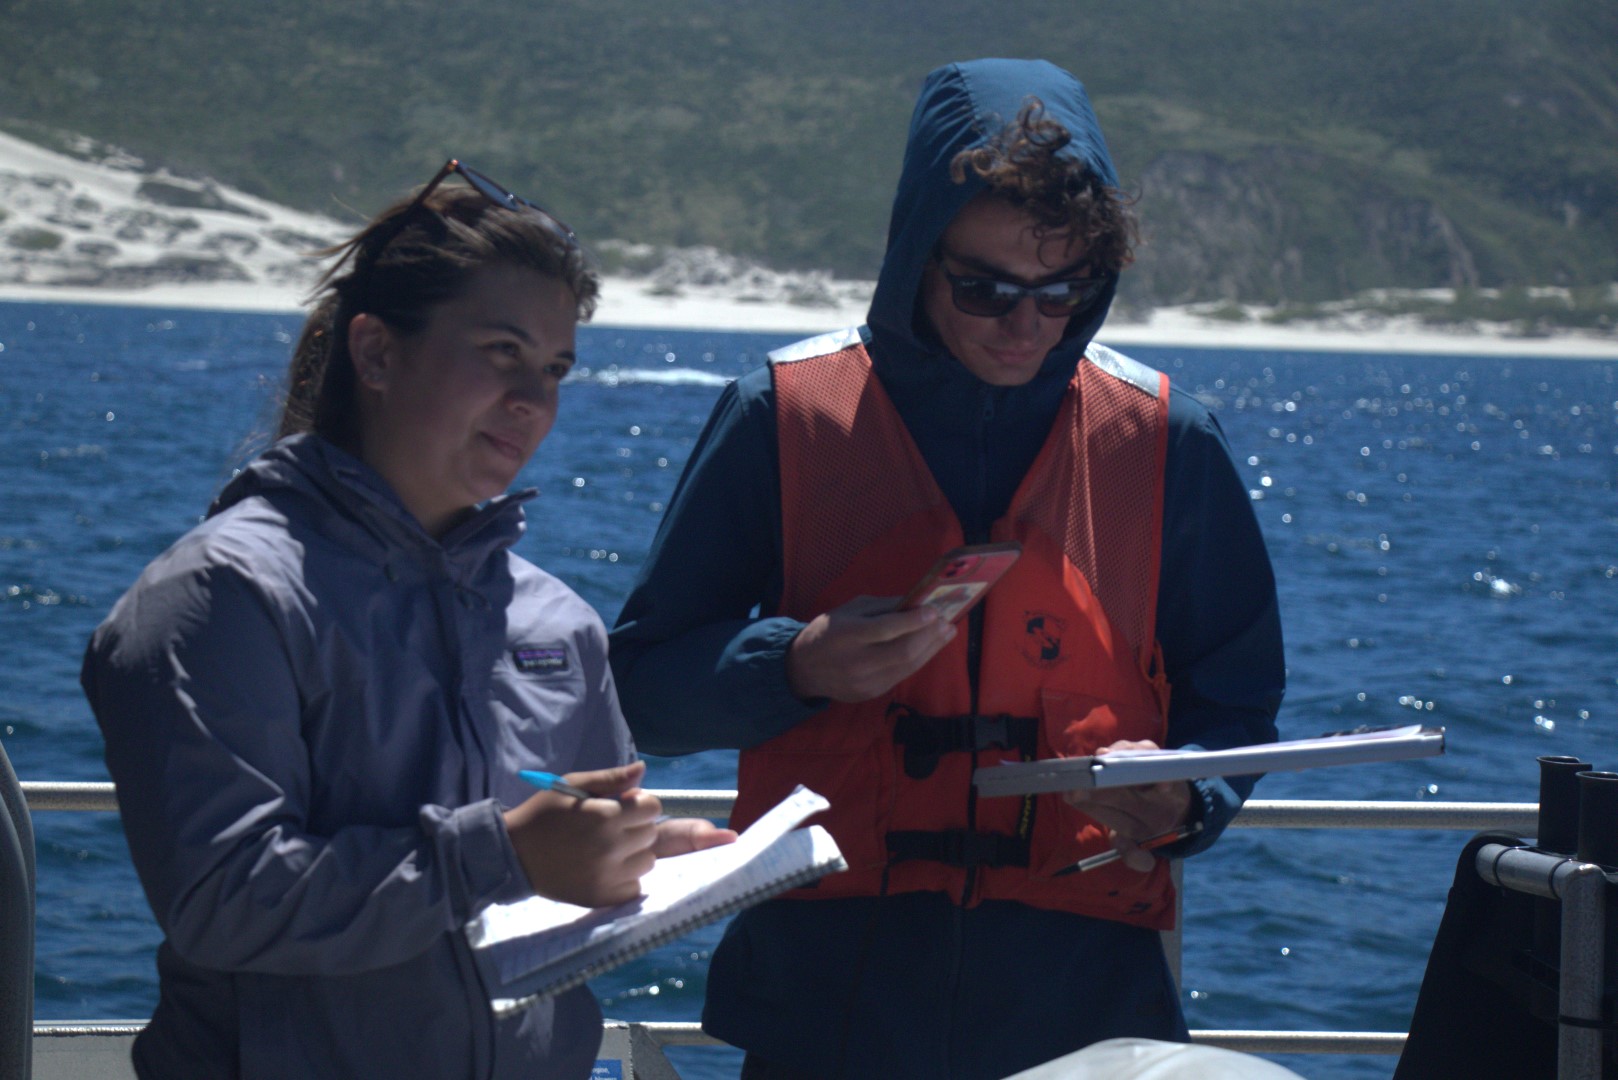 One of our fellows, Jenna Huynh, collecting data as part of her internship with the Channel Islands National Marine Sanctuary.